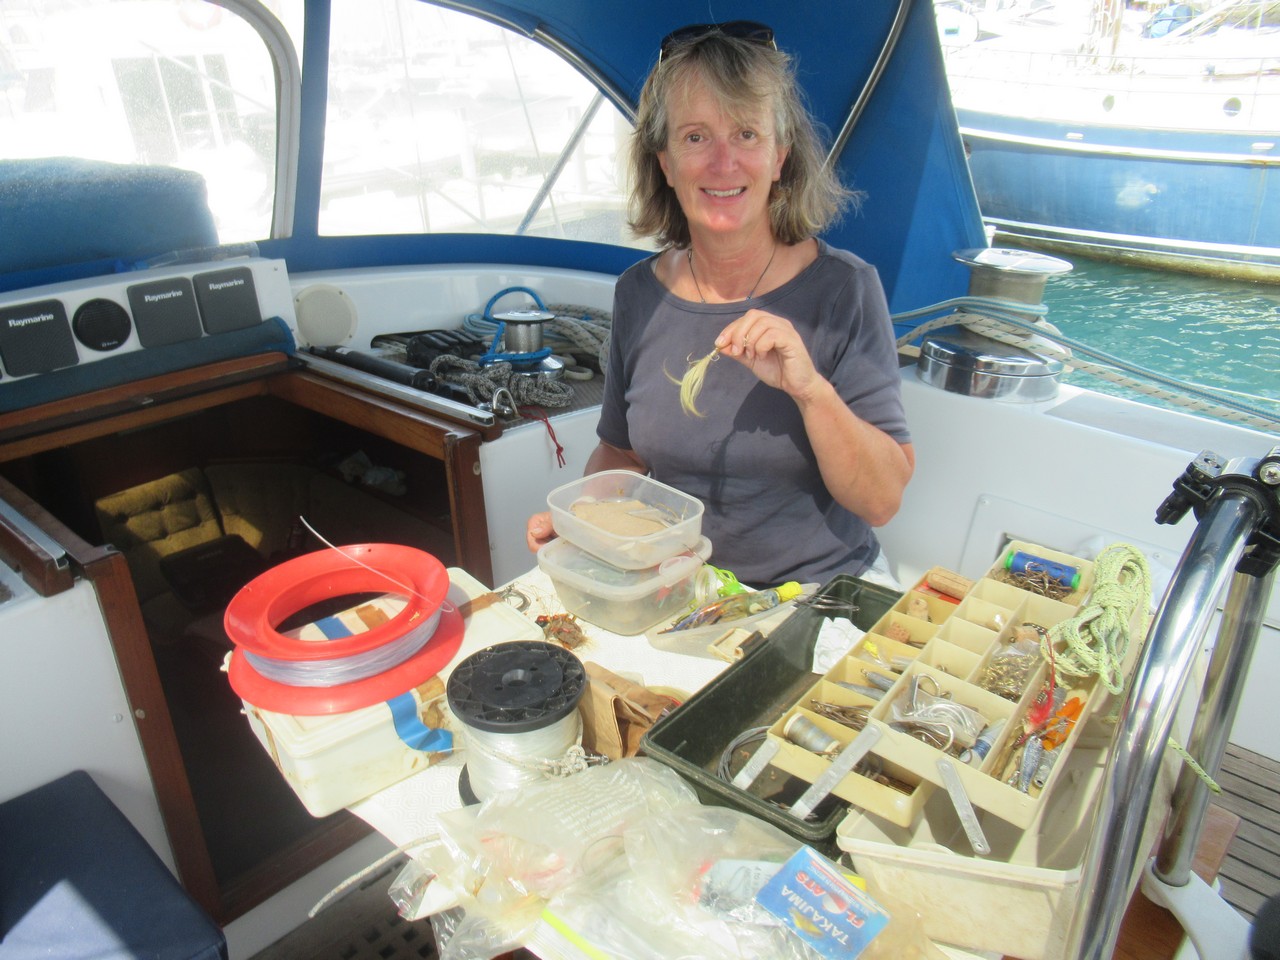 Our fishing gear is full of memories (and human hair!).